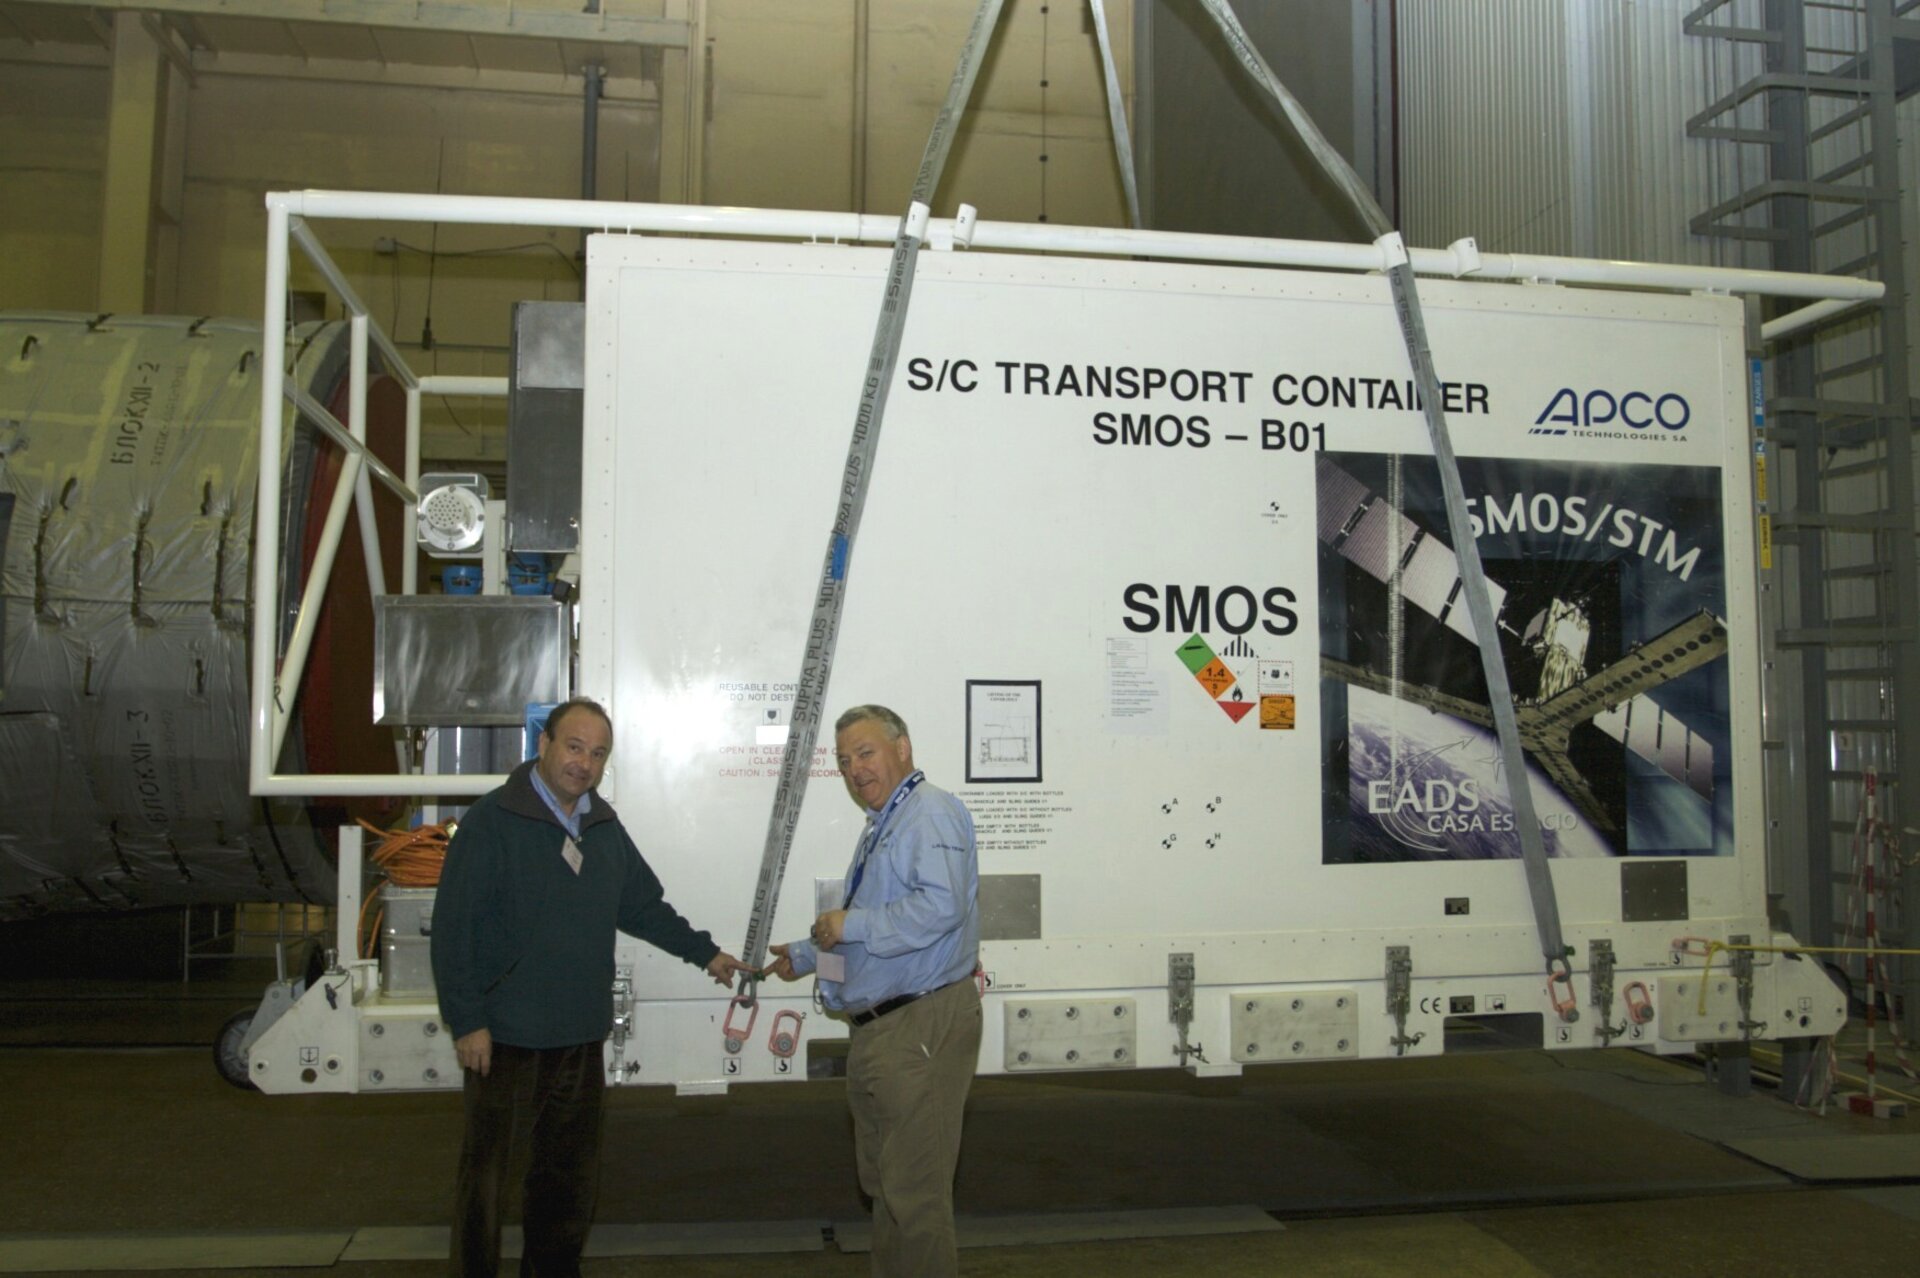 SMOS container arrival